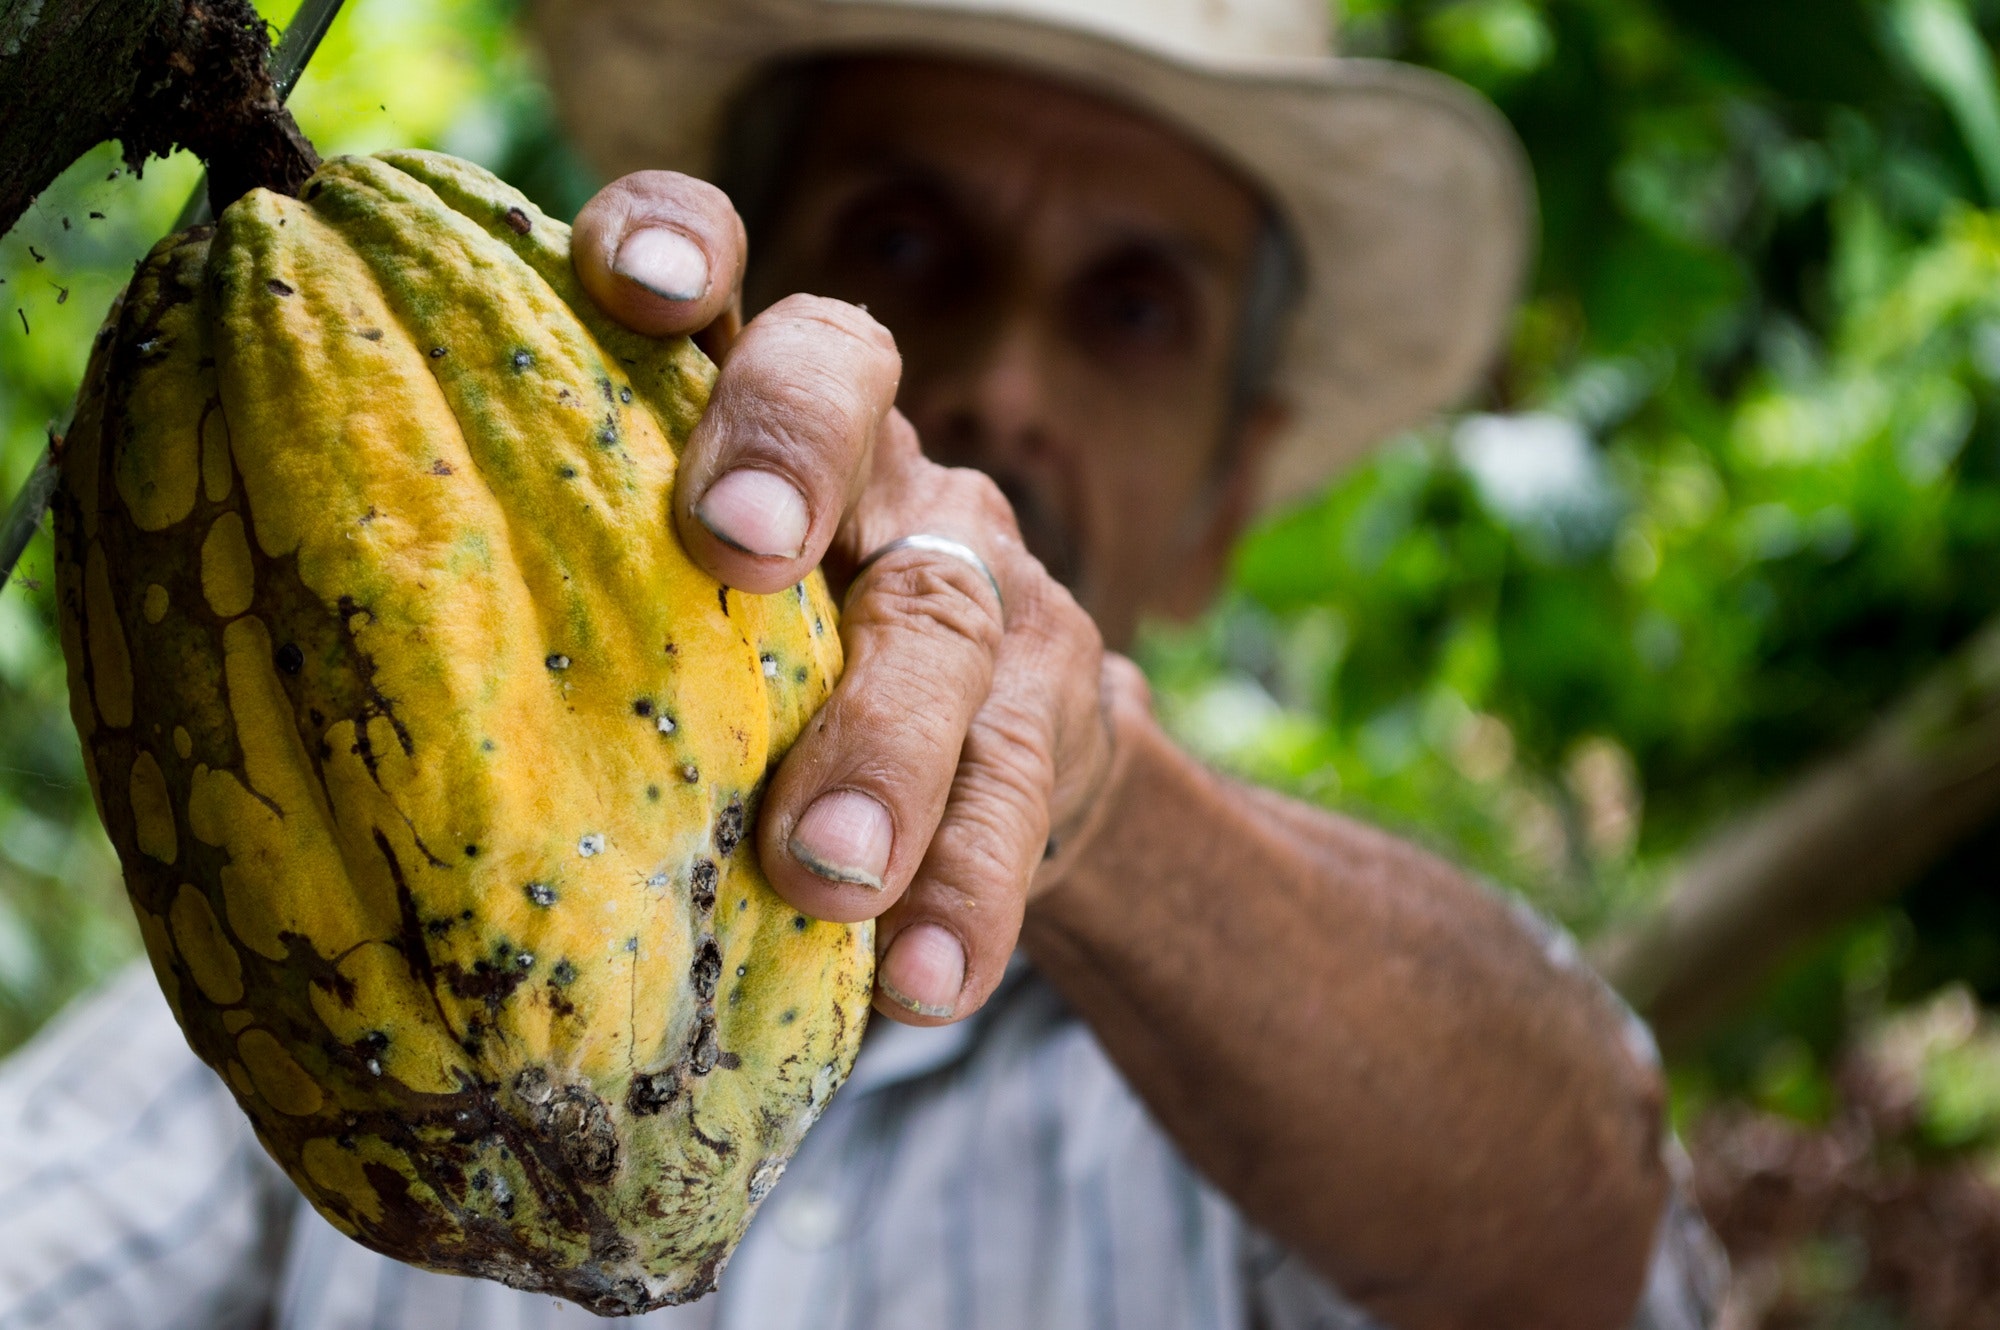 Cacao fruit used to make chocolate contains the bitter alkaloid theobromine.